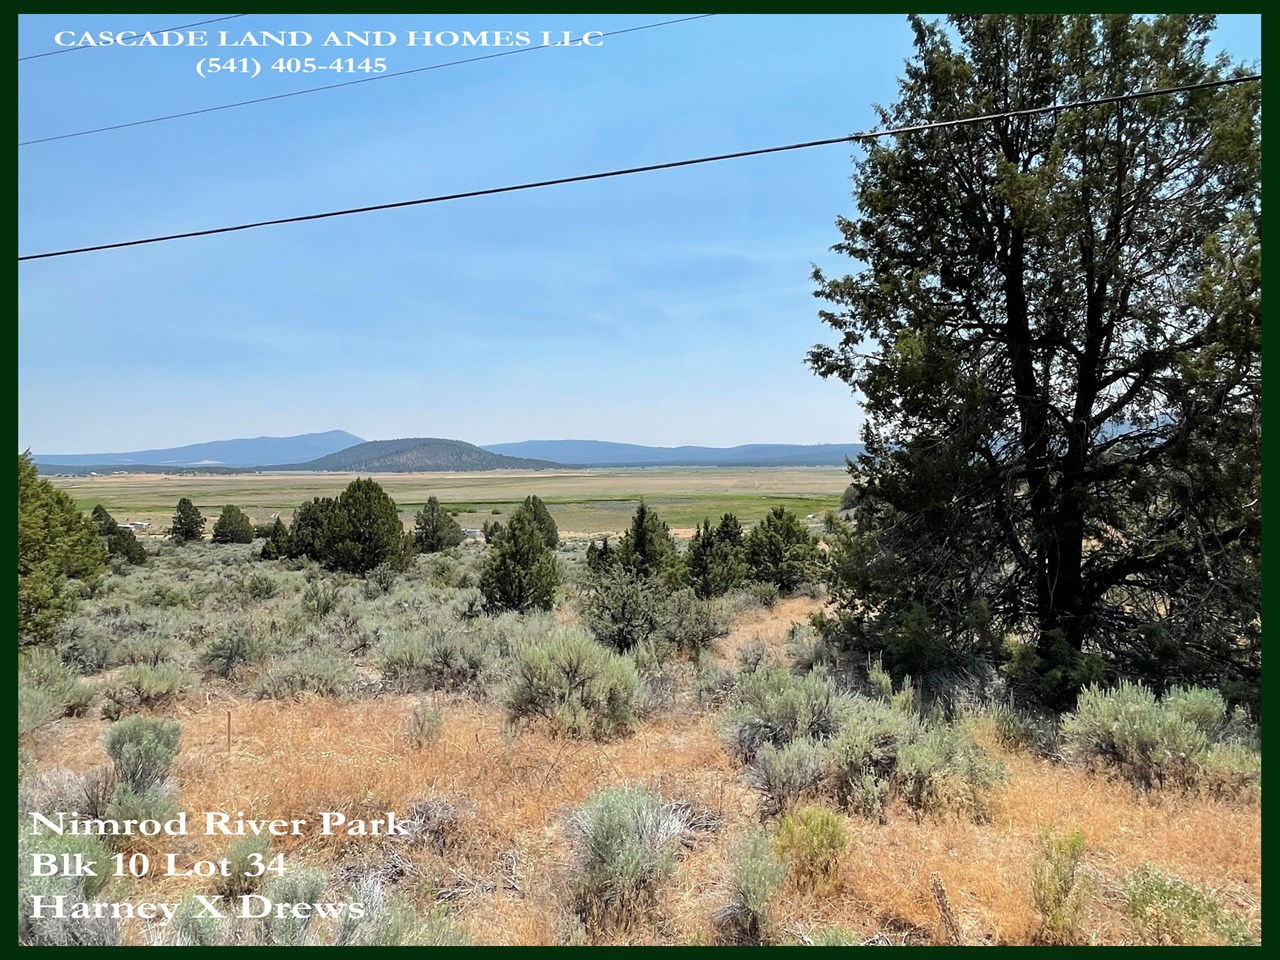 the property has a few trees and is covered with native vegetation, mostly sage, and grasses. the views from the property are  beautiful as you look out across the valley and the surrounding hillsides.